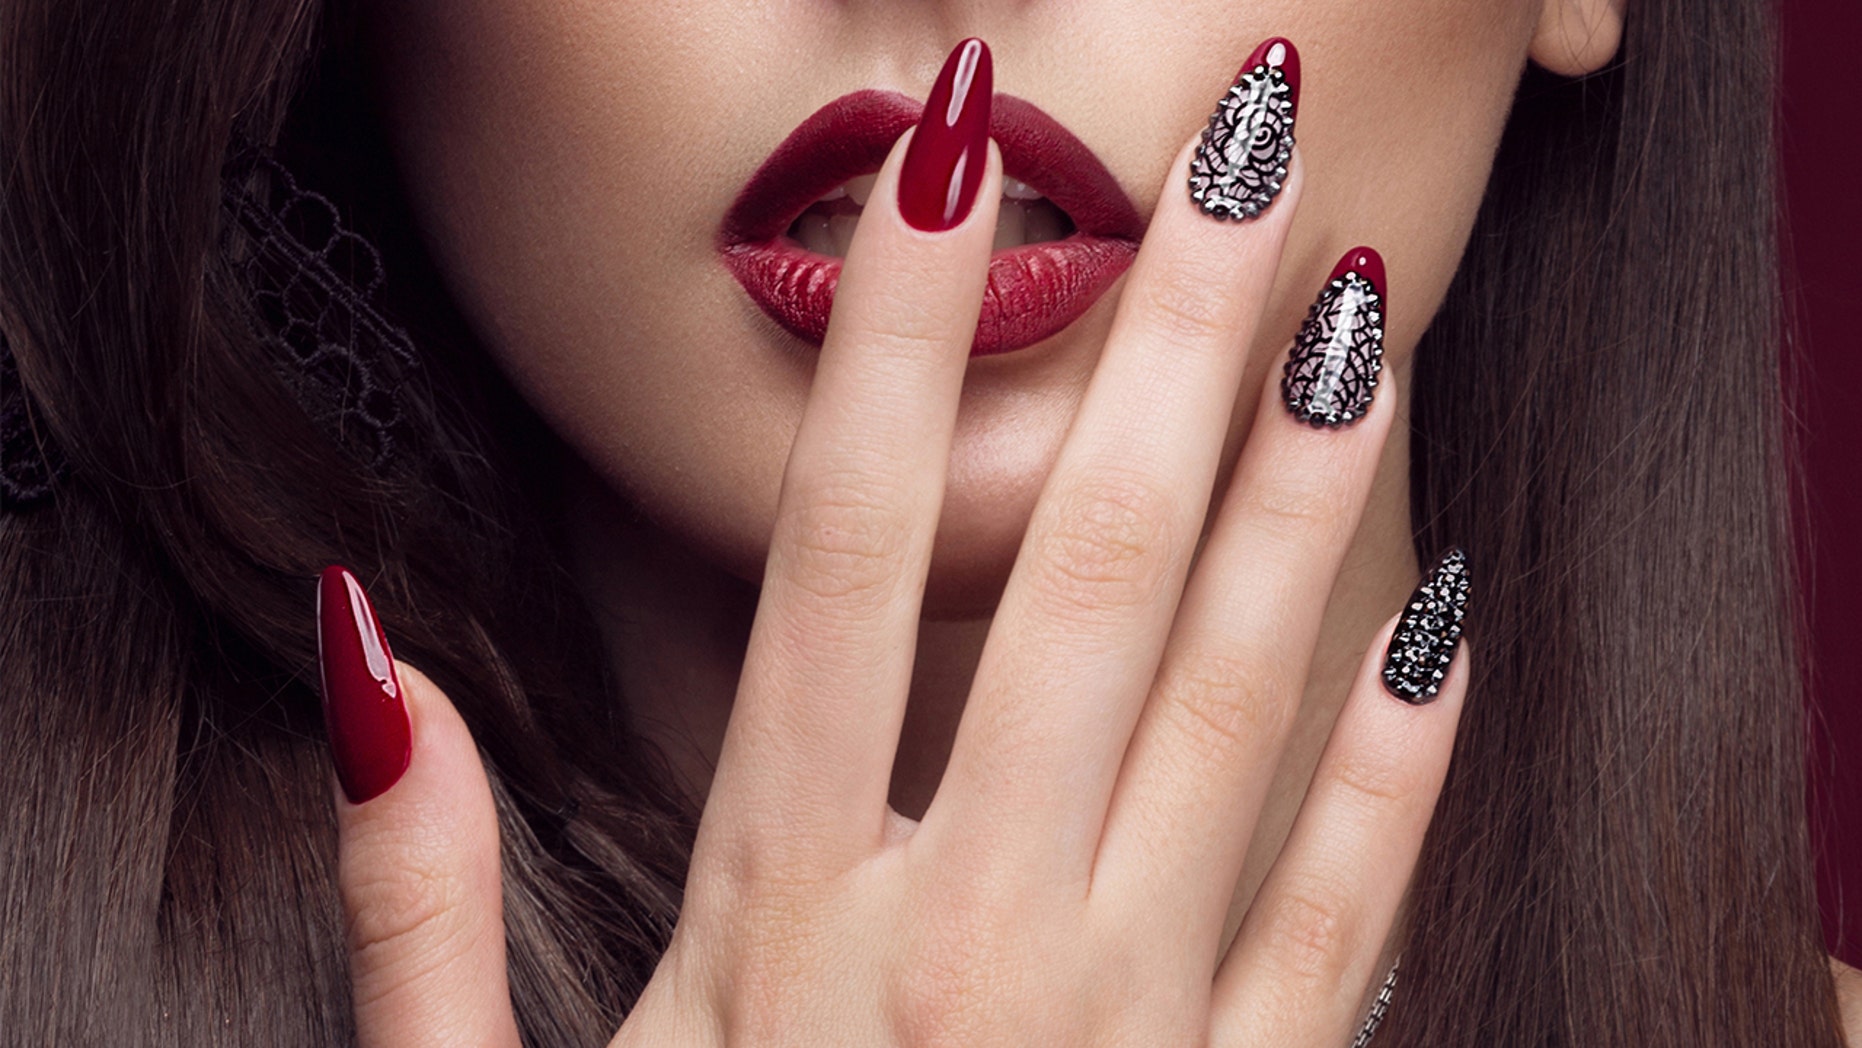 7. Last Kings Nail Designs for Short Nails - wide 5